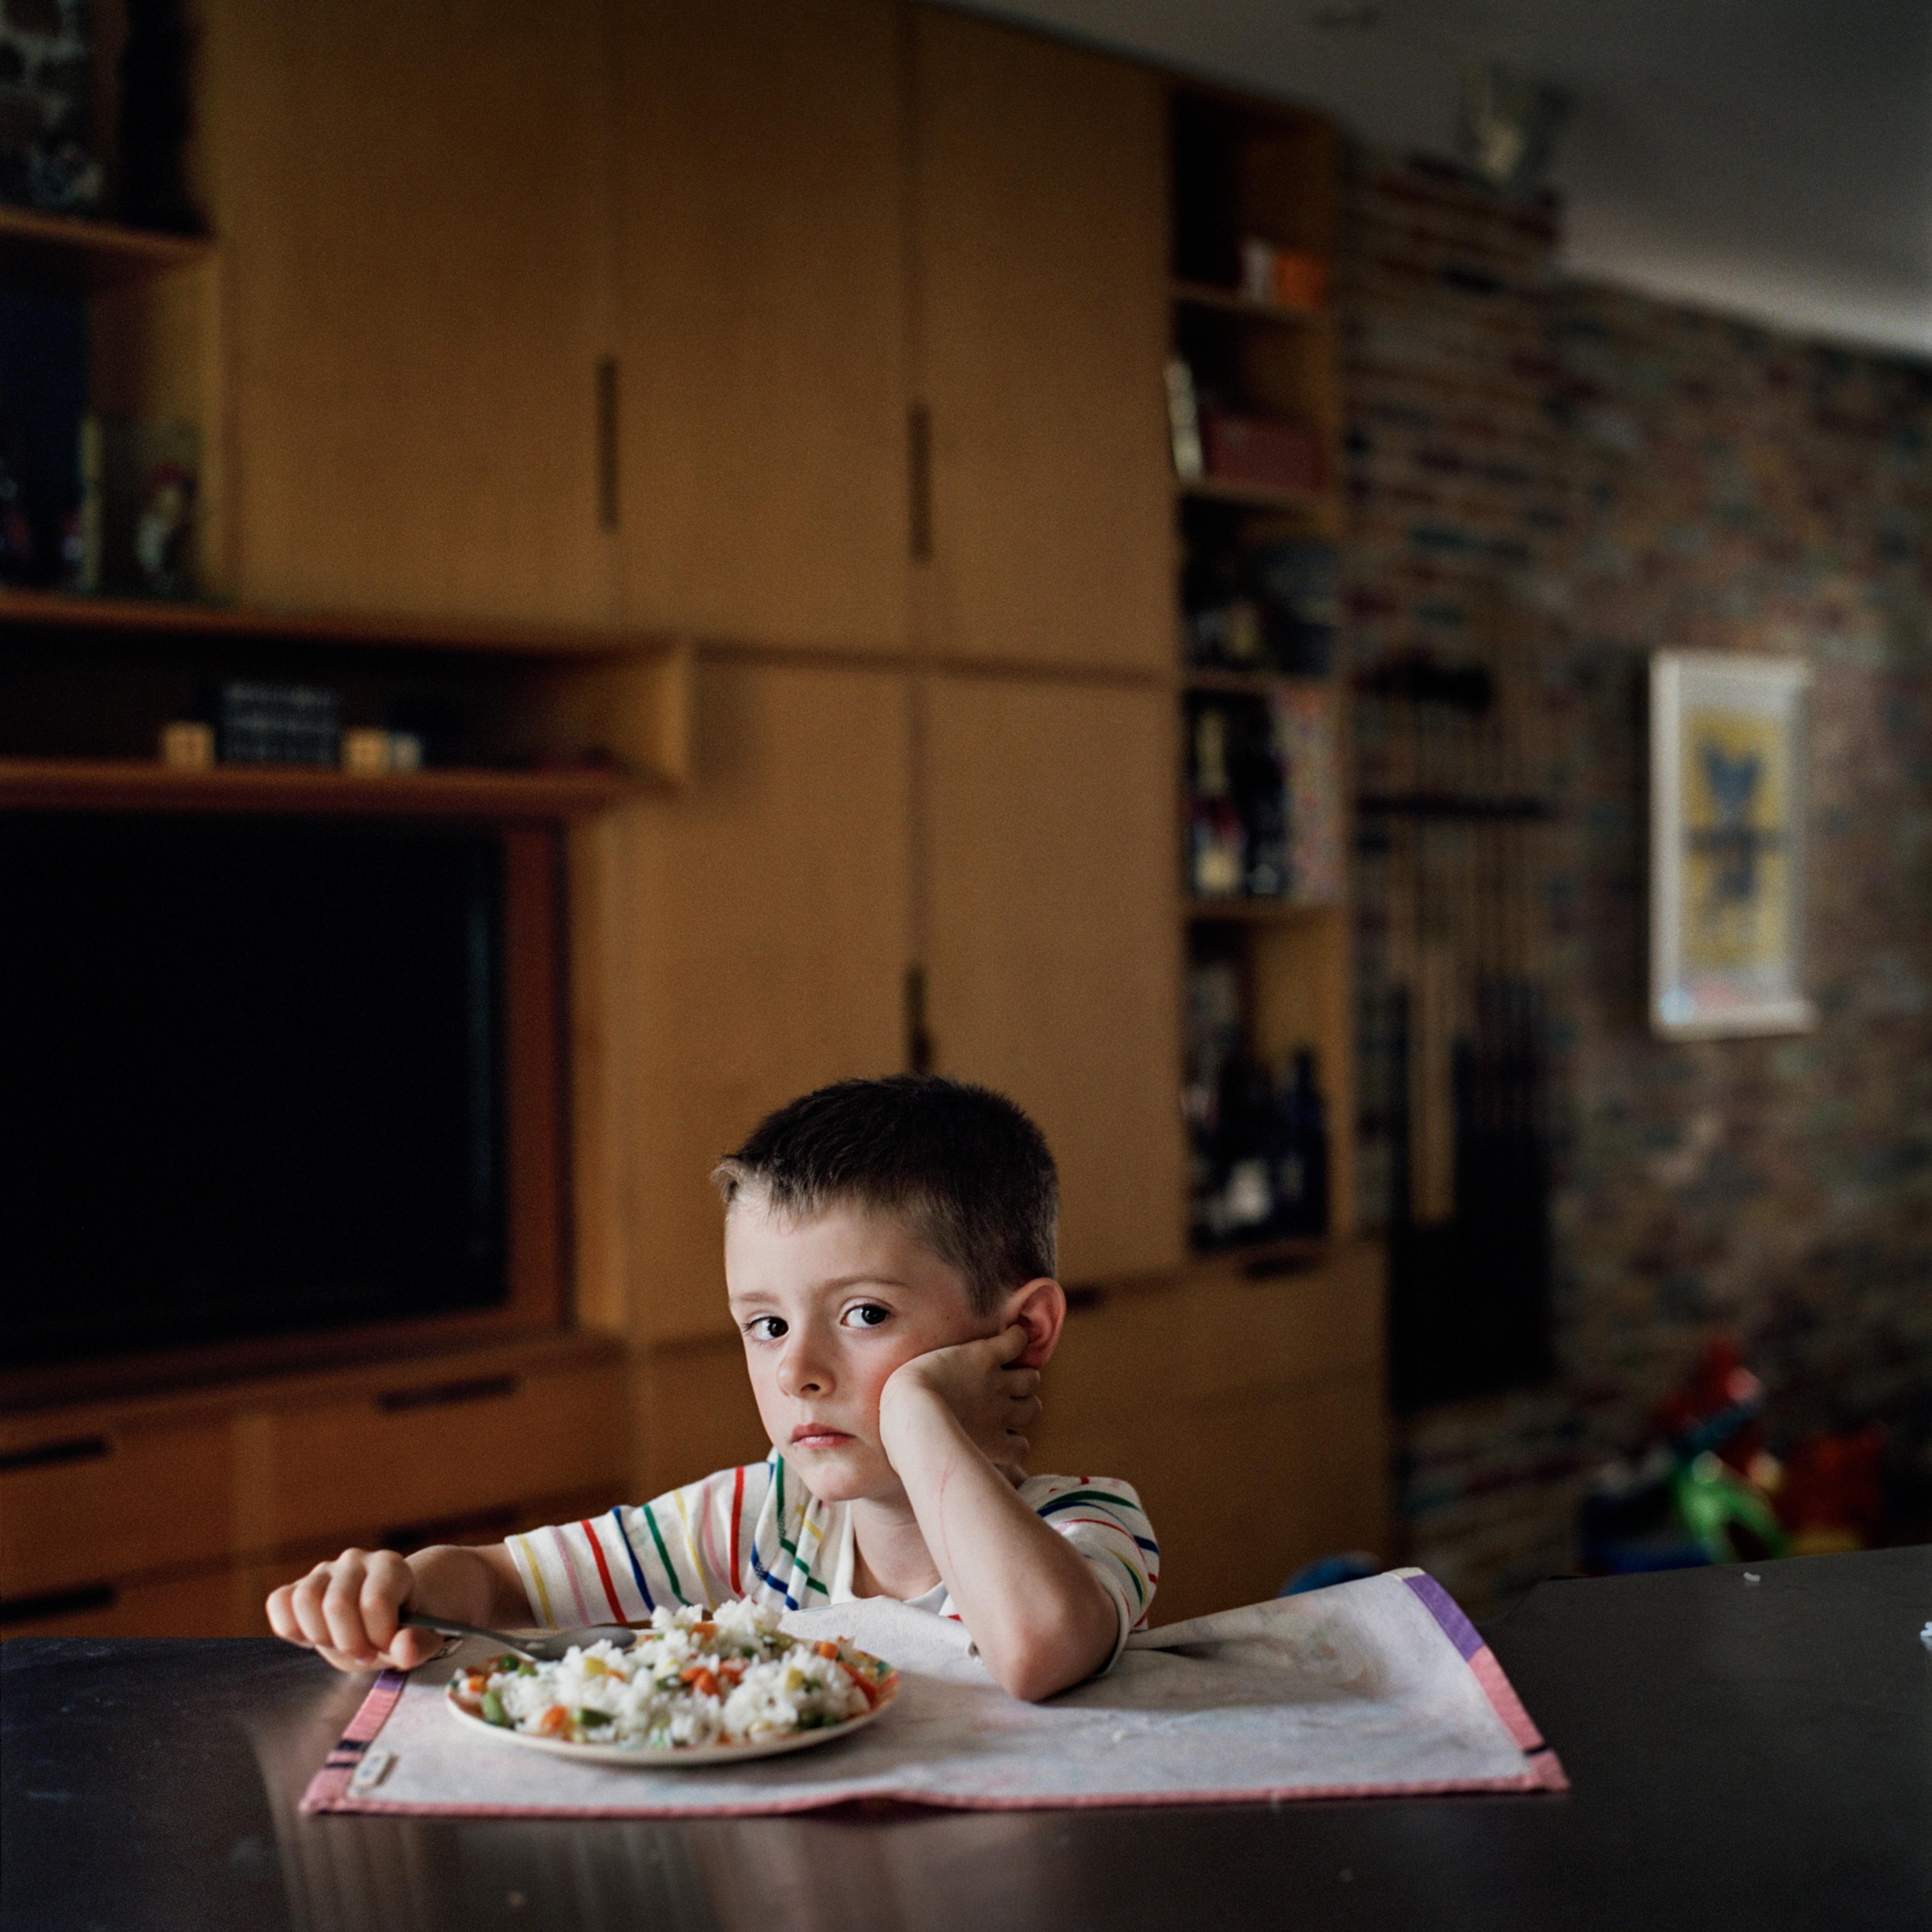 A photograph of a young child sitting at a kitchen table eating a meal